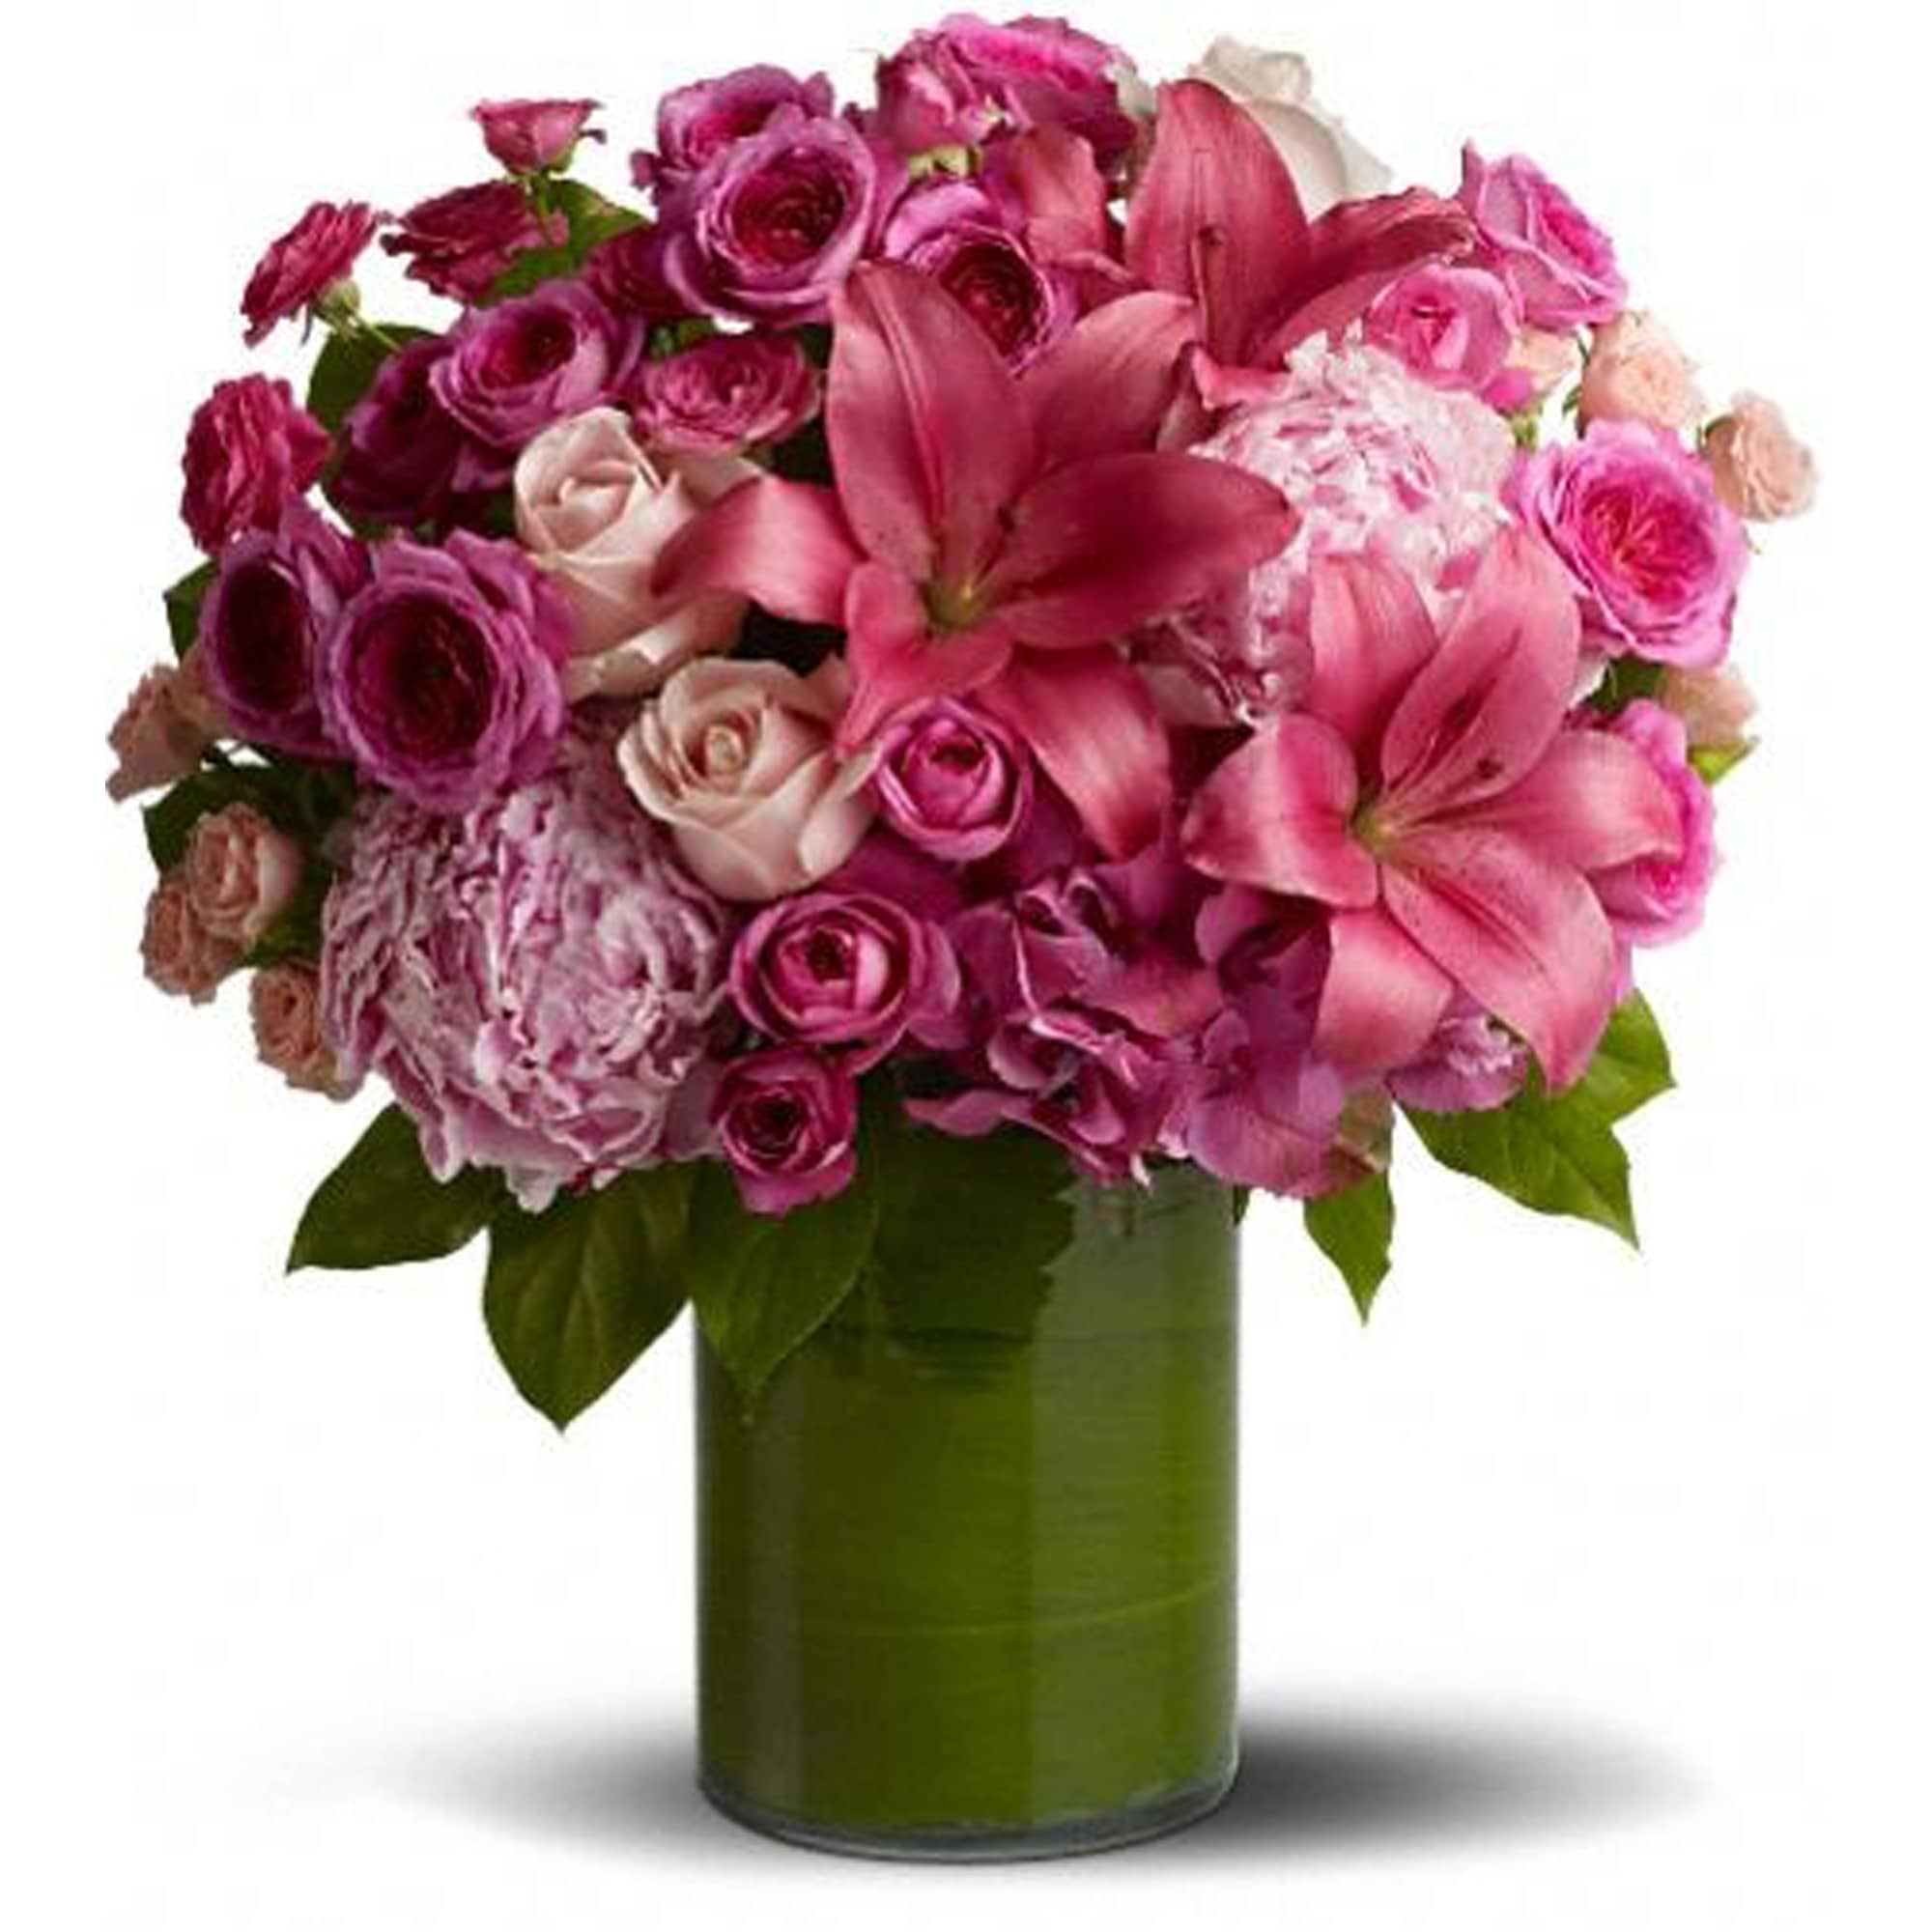 Grand Impressions  - Have a special occasion that requires a truly magnificent gift? Send a glorious mix of roses and blooms in a range of luscious pinks, and you'll make a grand impression. An eye-catching choice for a birthday, anniversary or any of life's most extraordinary moments.  A mix of fresh pink flowers such as peonies, hydrangeas, Asiatic lilies and roses is delivered in a glass vase lined with leaves.  Approximately 17&quot; (W) x 18.5&quot; (H)  Orientation: All-Around      As Shown : TFWEB508 